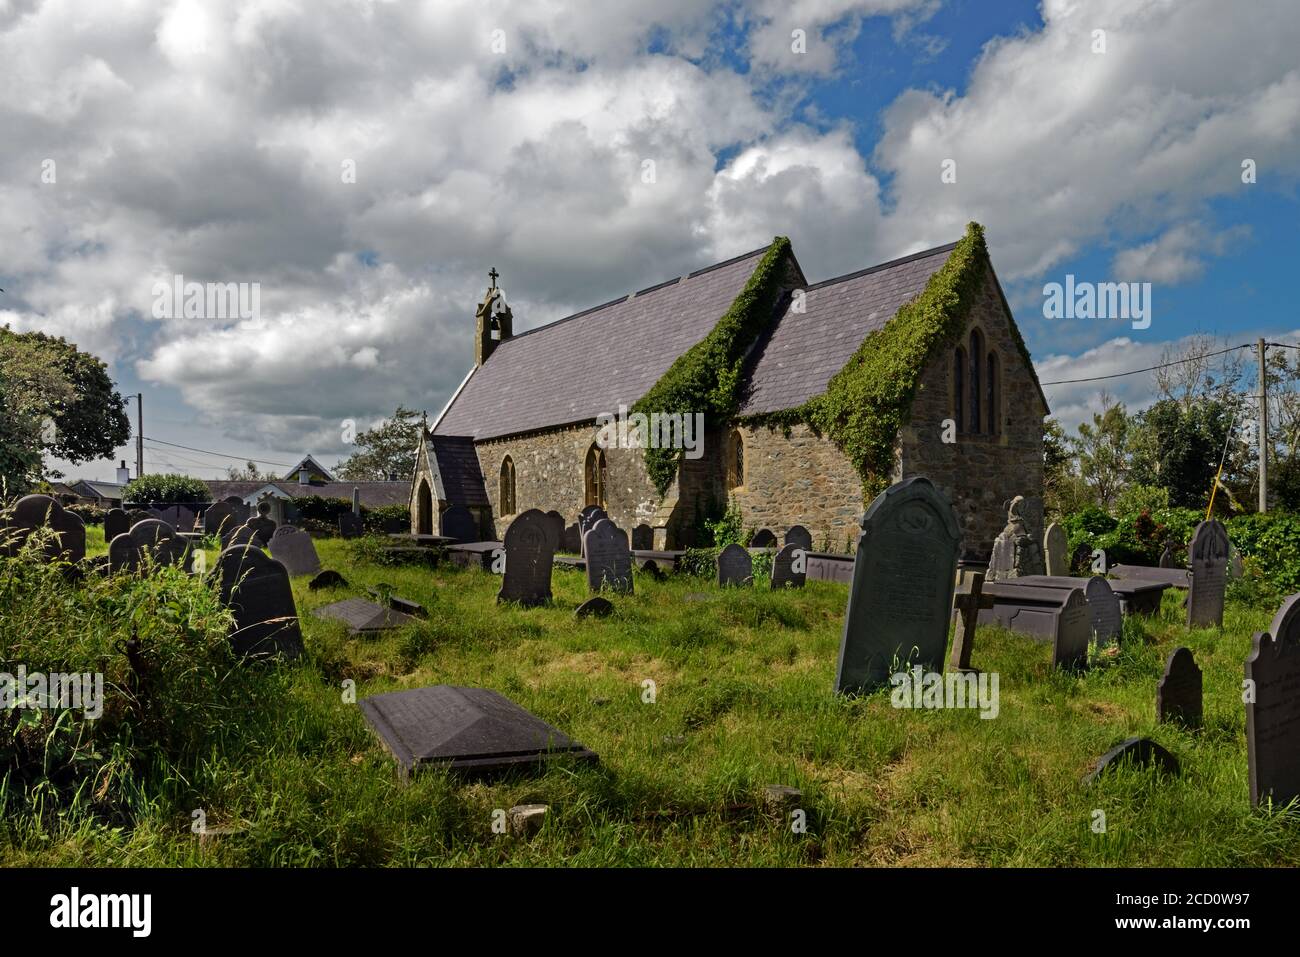 St Deiniol's Church, Llanddaniel Fab, Anglesey, is a 19th-century parish church but no longer used for worship. It is a Grade II listed building. Stock Photo